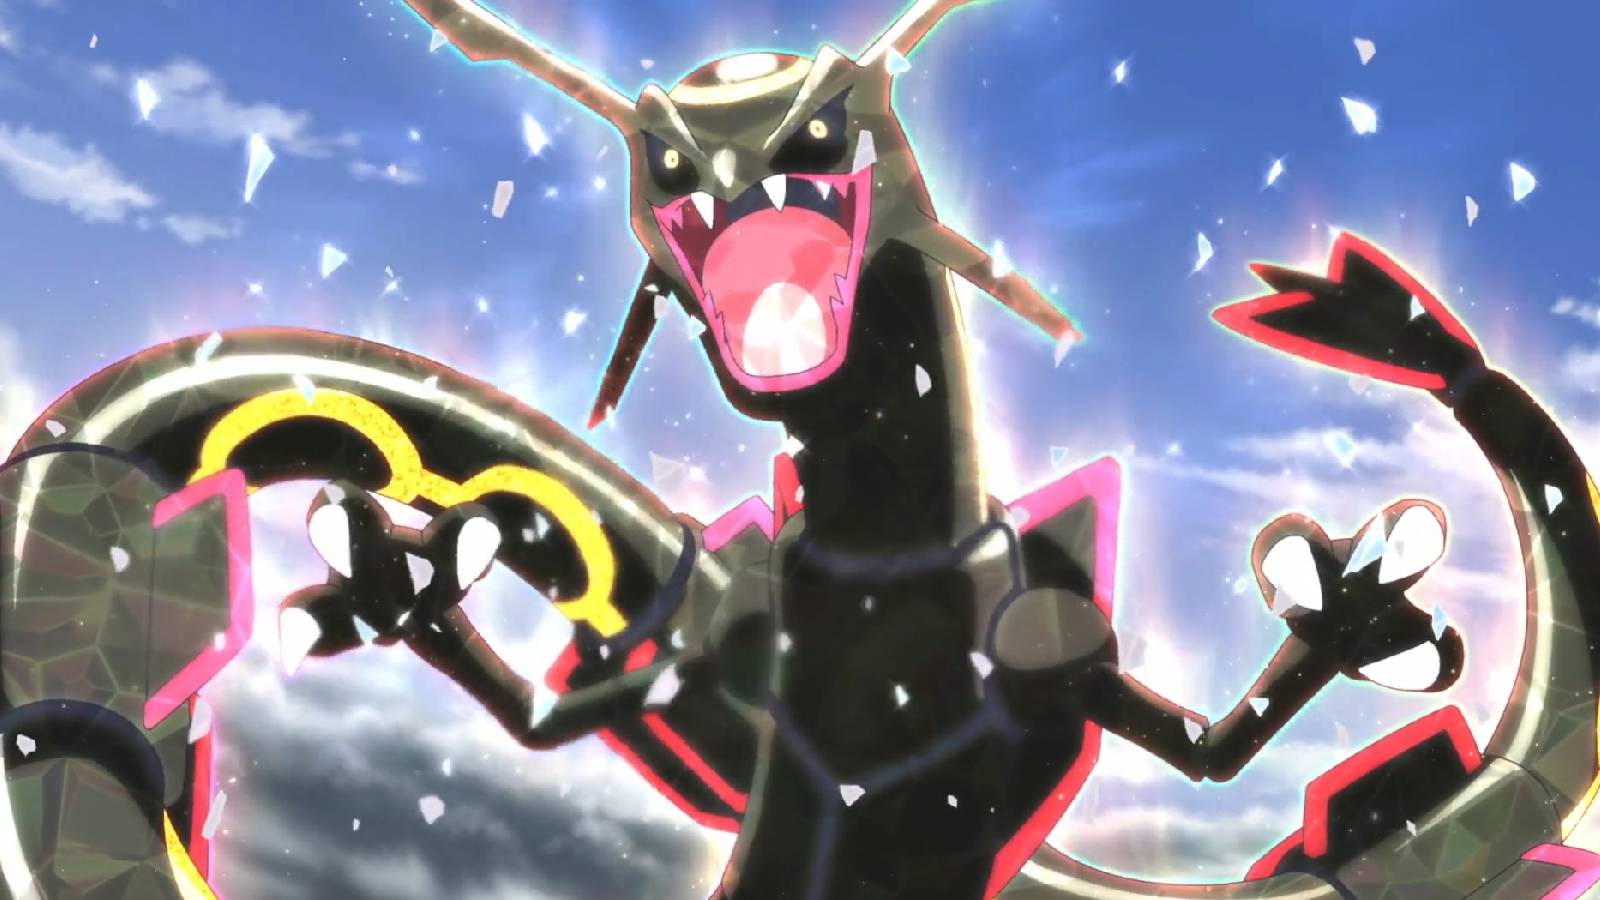 a screenshot from the Pokemon anime shows a Shiny Rayquaza